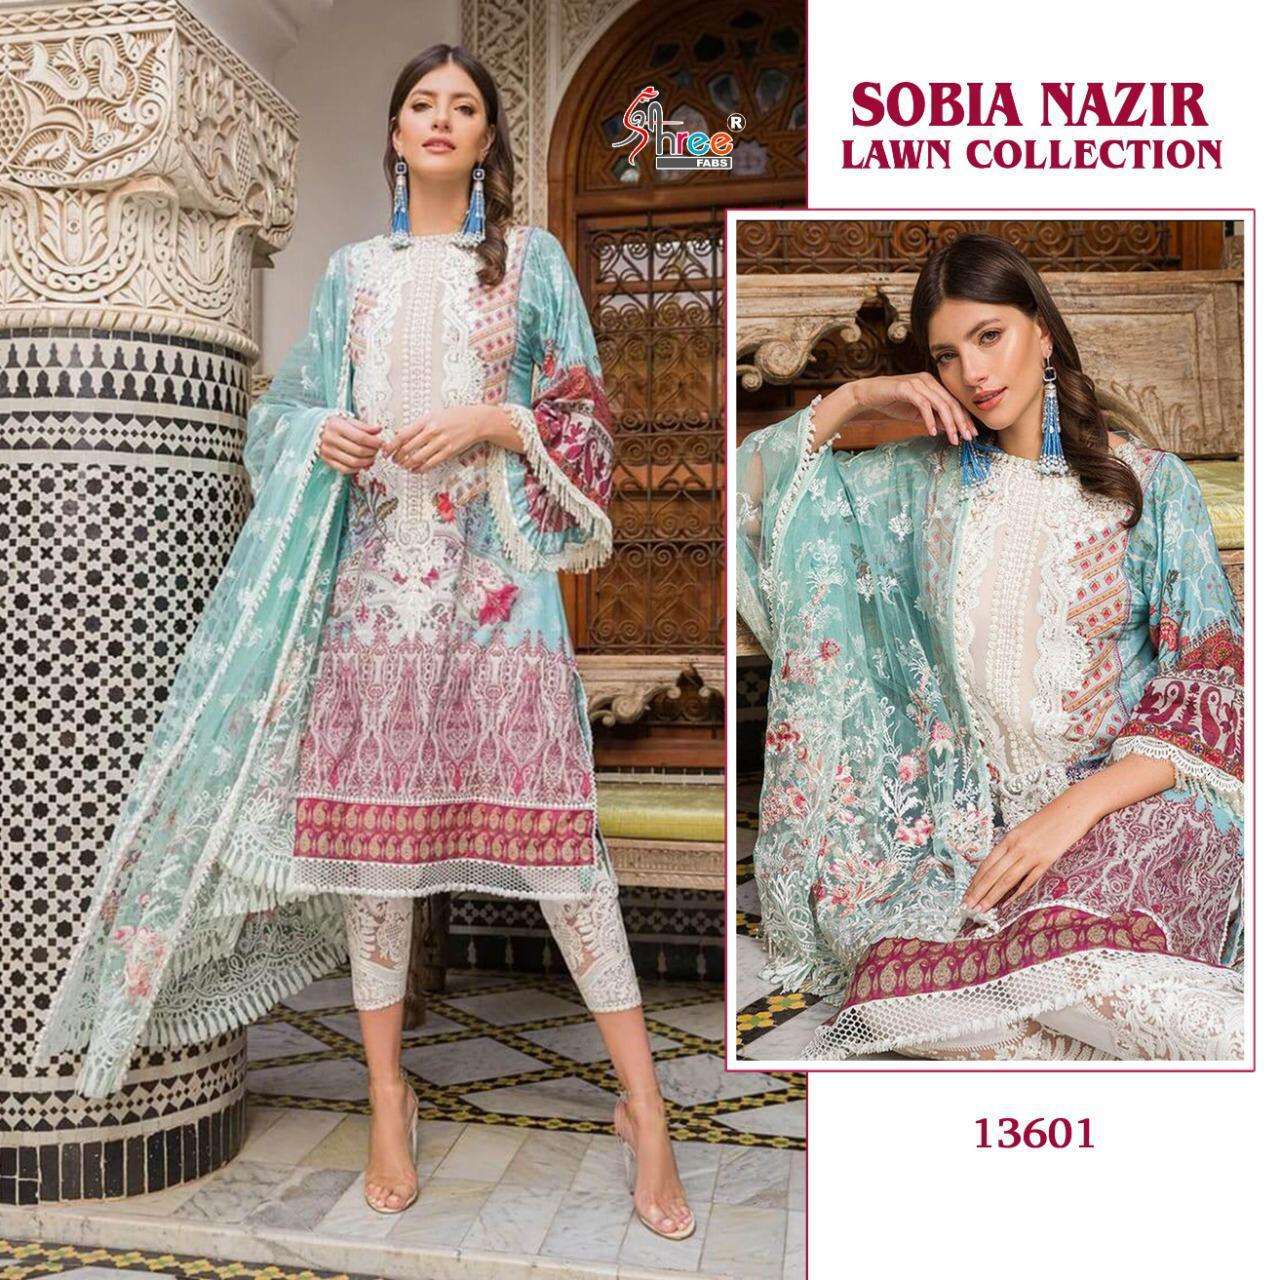 SHREE FAB SOBIA NAZIR LAWN COLLECTION 13601 PURE LAWN COTTON...